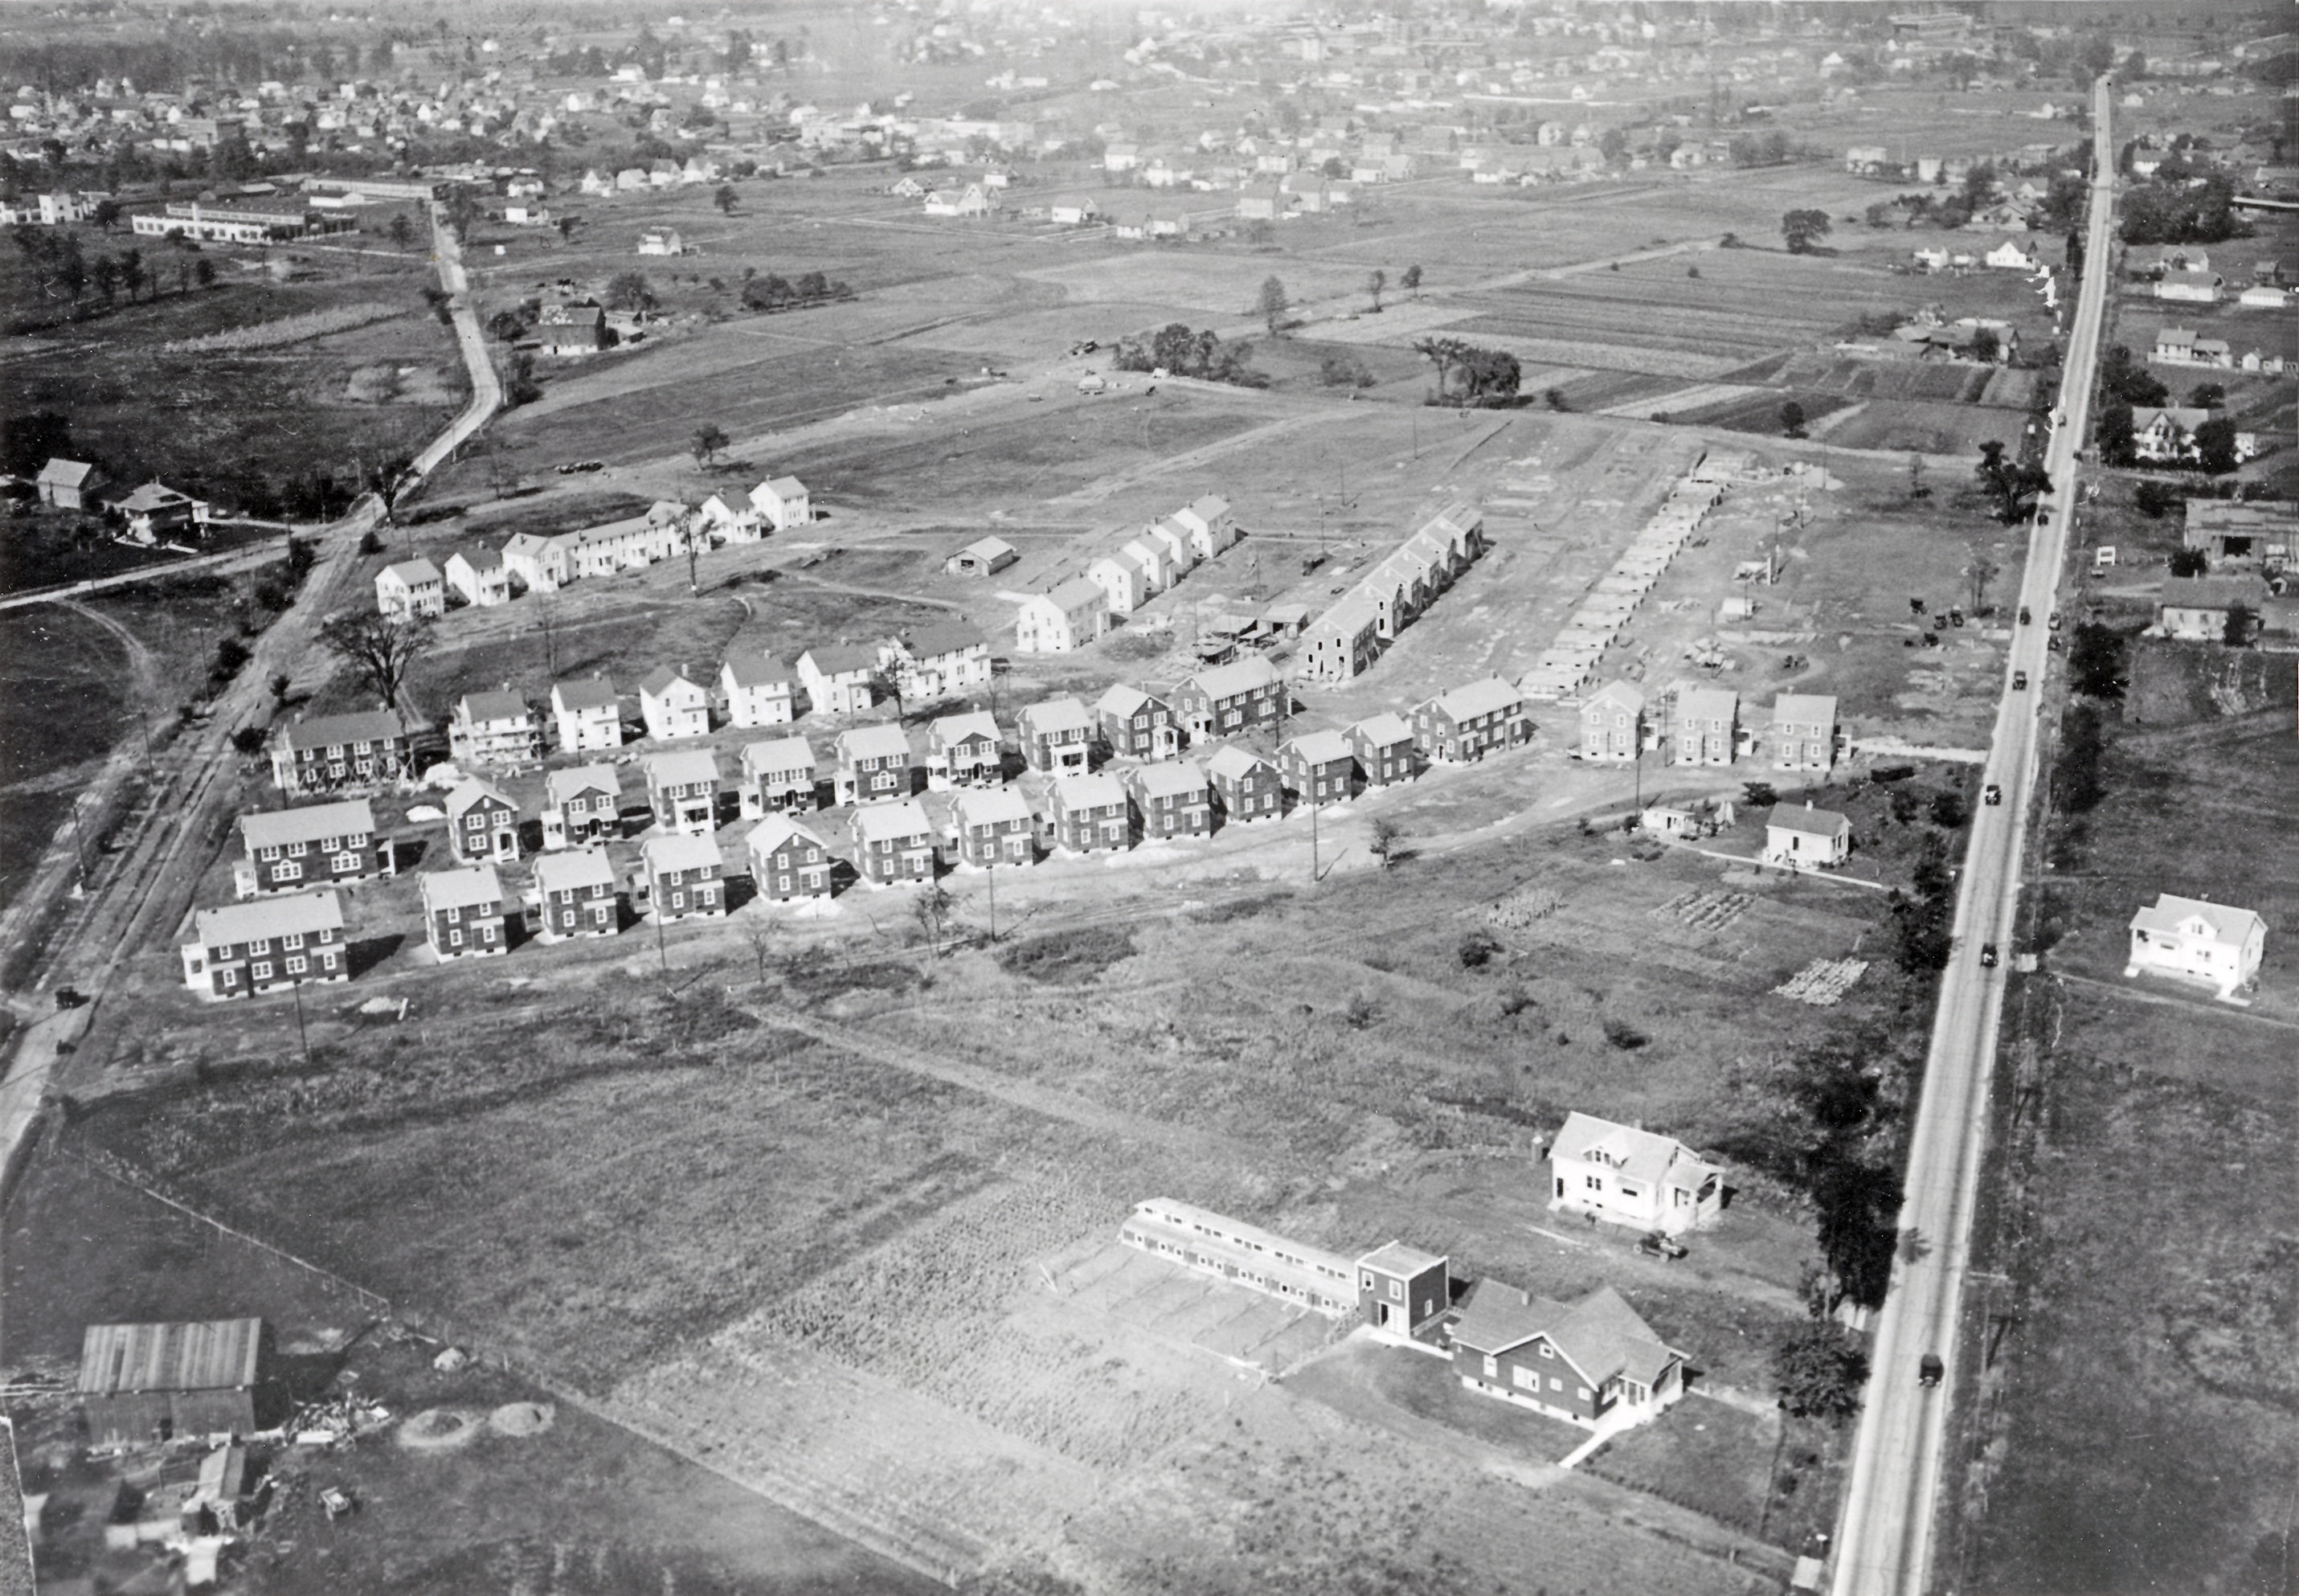 The Garden Homes housing development was the first municipally-sponsored public housing project in the United States. This 1922 aerial photograph provides a view of the neatly laid out homes just before they were completed in 1923.